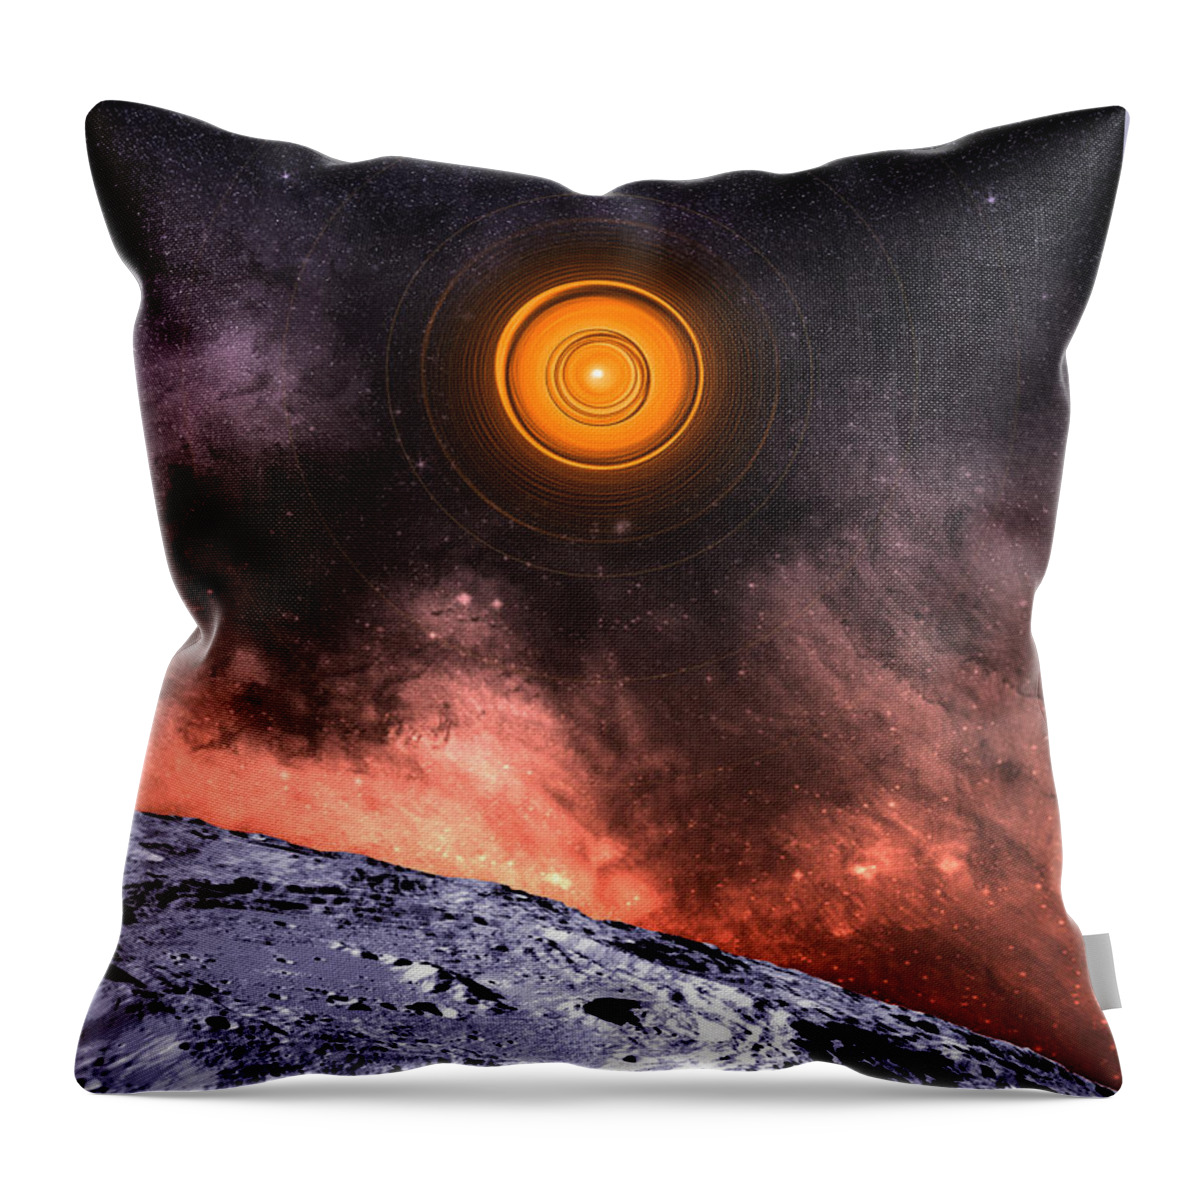 Moon Throw Pillow featuring the digital art Moon View by Phil Perkins